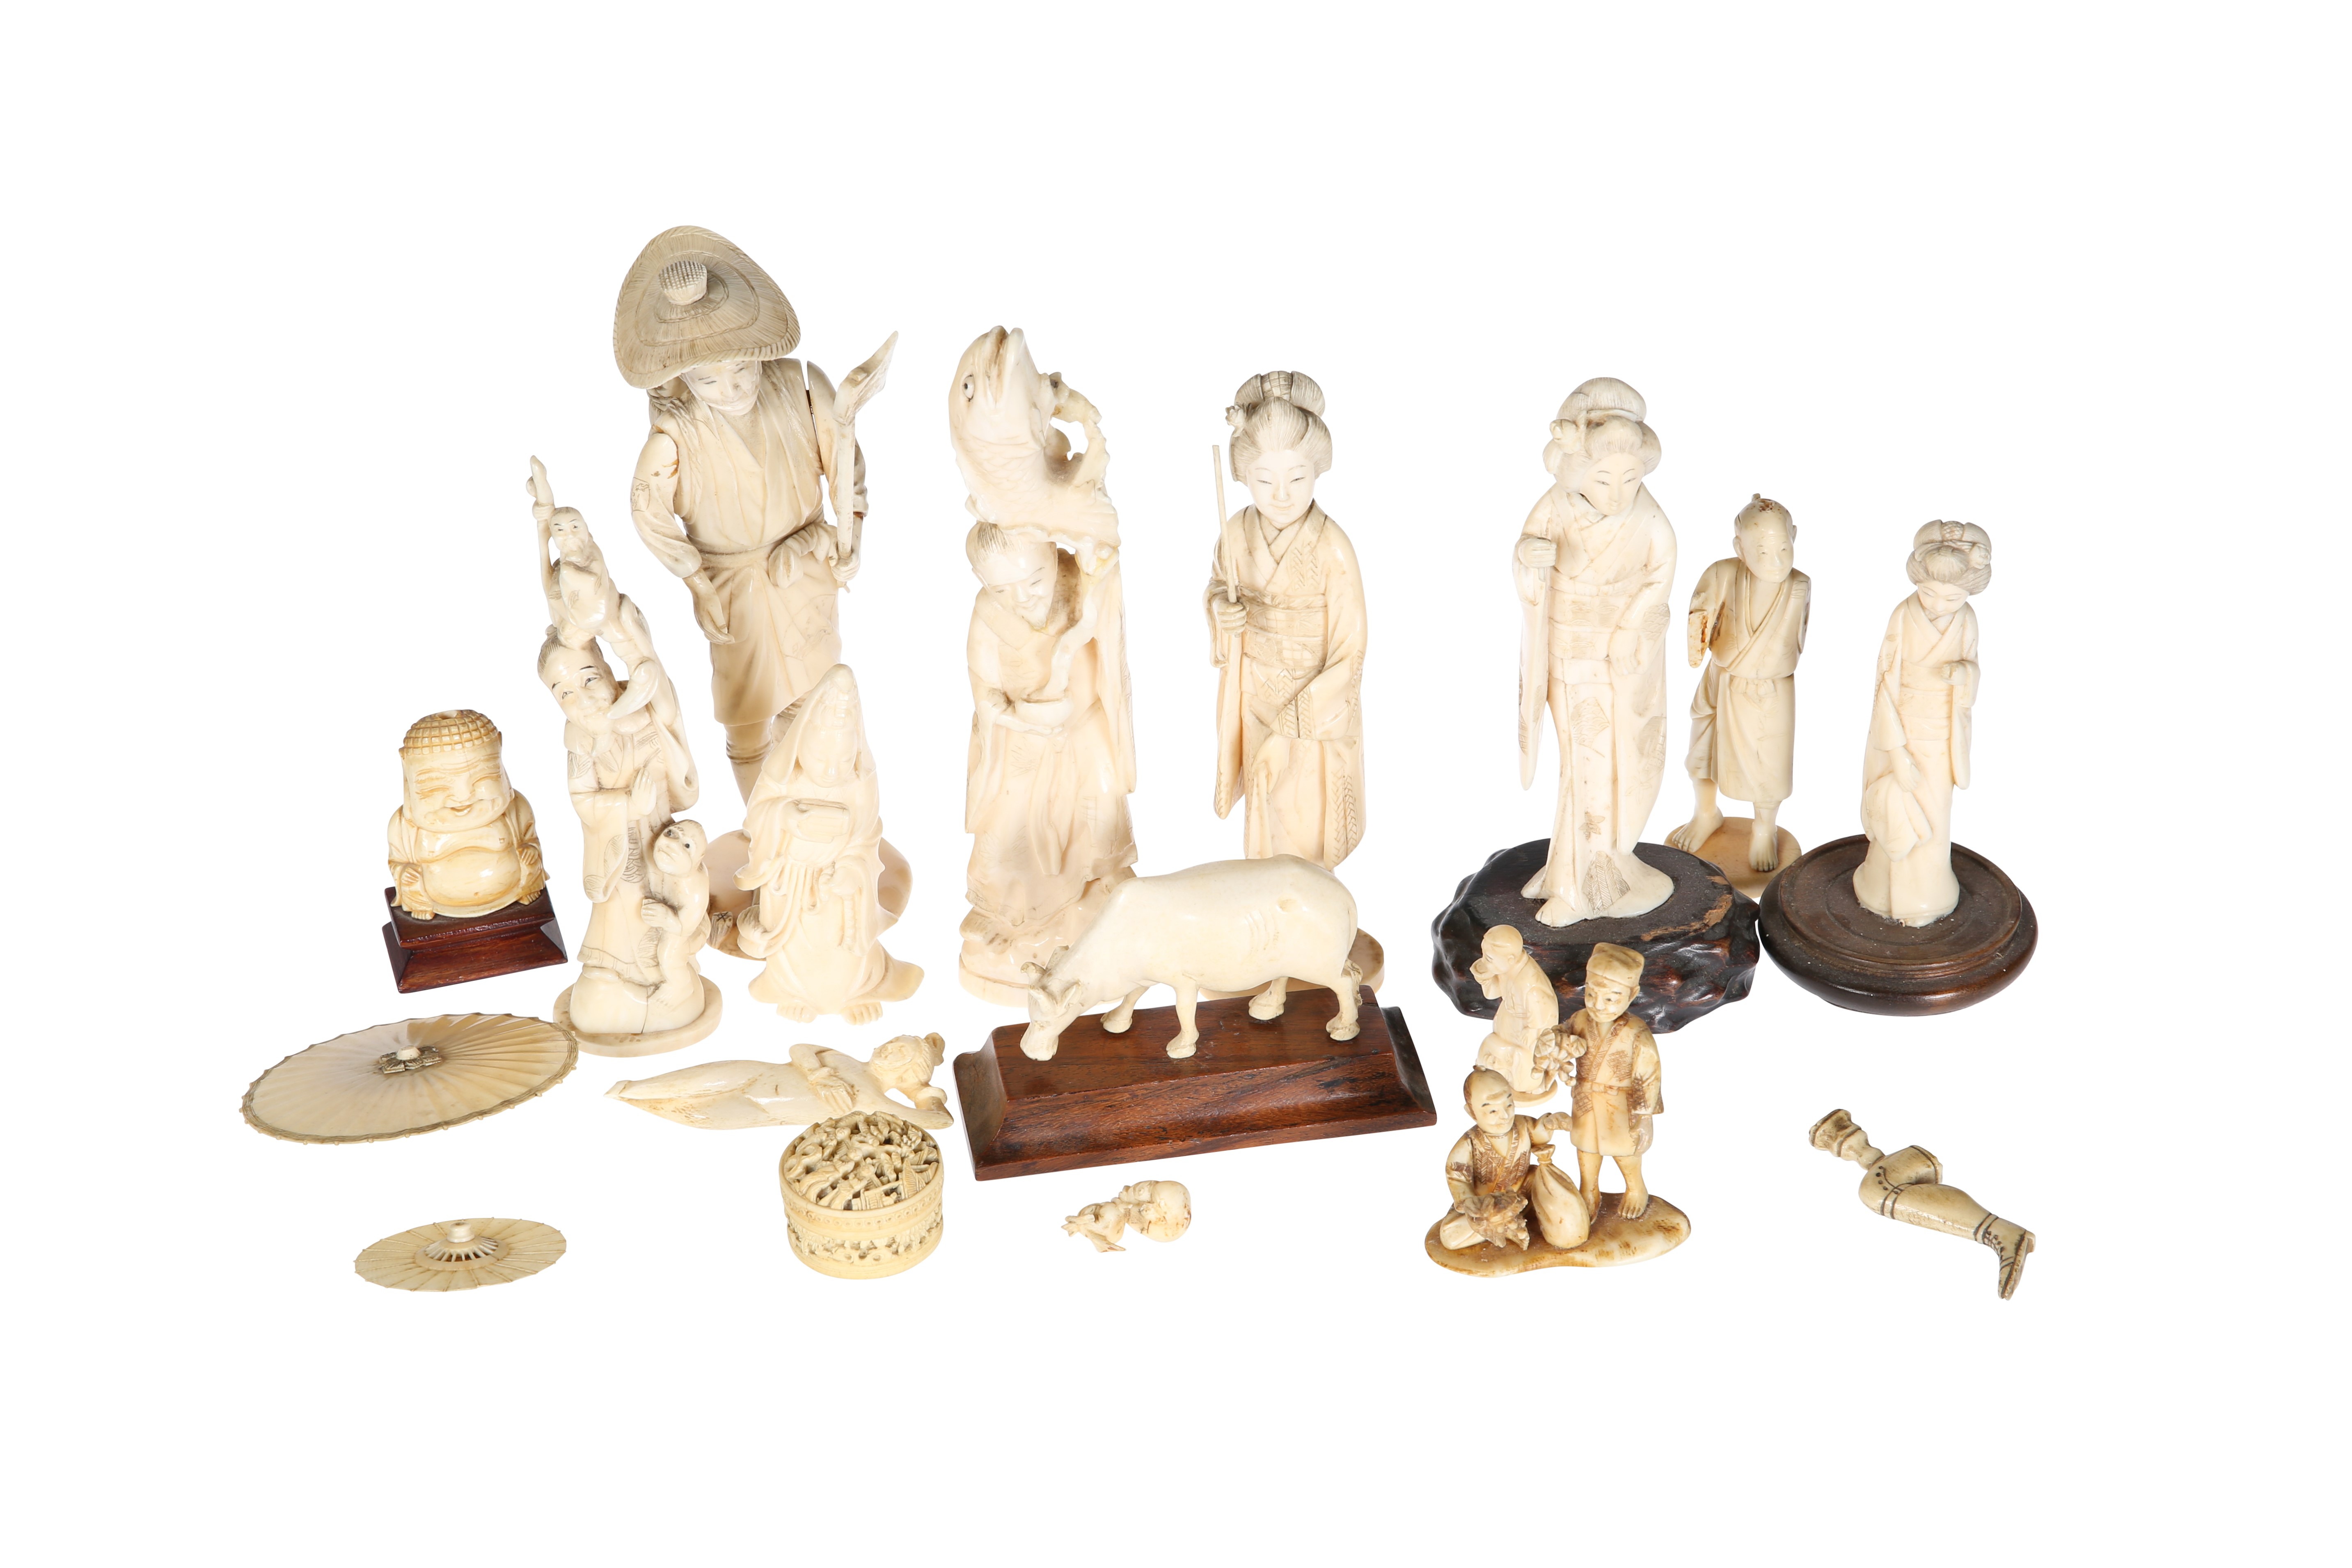 A COLLECTION OF IVORY CARVINGS, 19TH CENTURY AND EARLY 20TH CENTURY